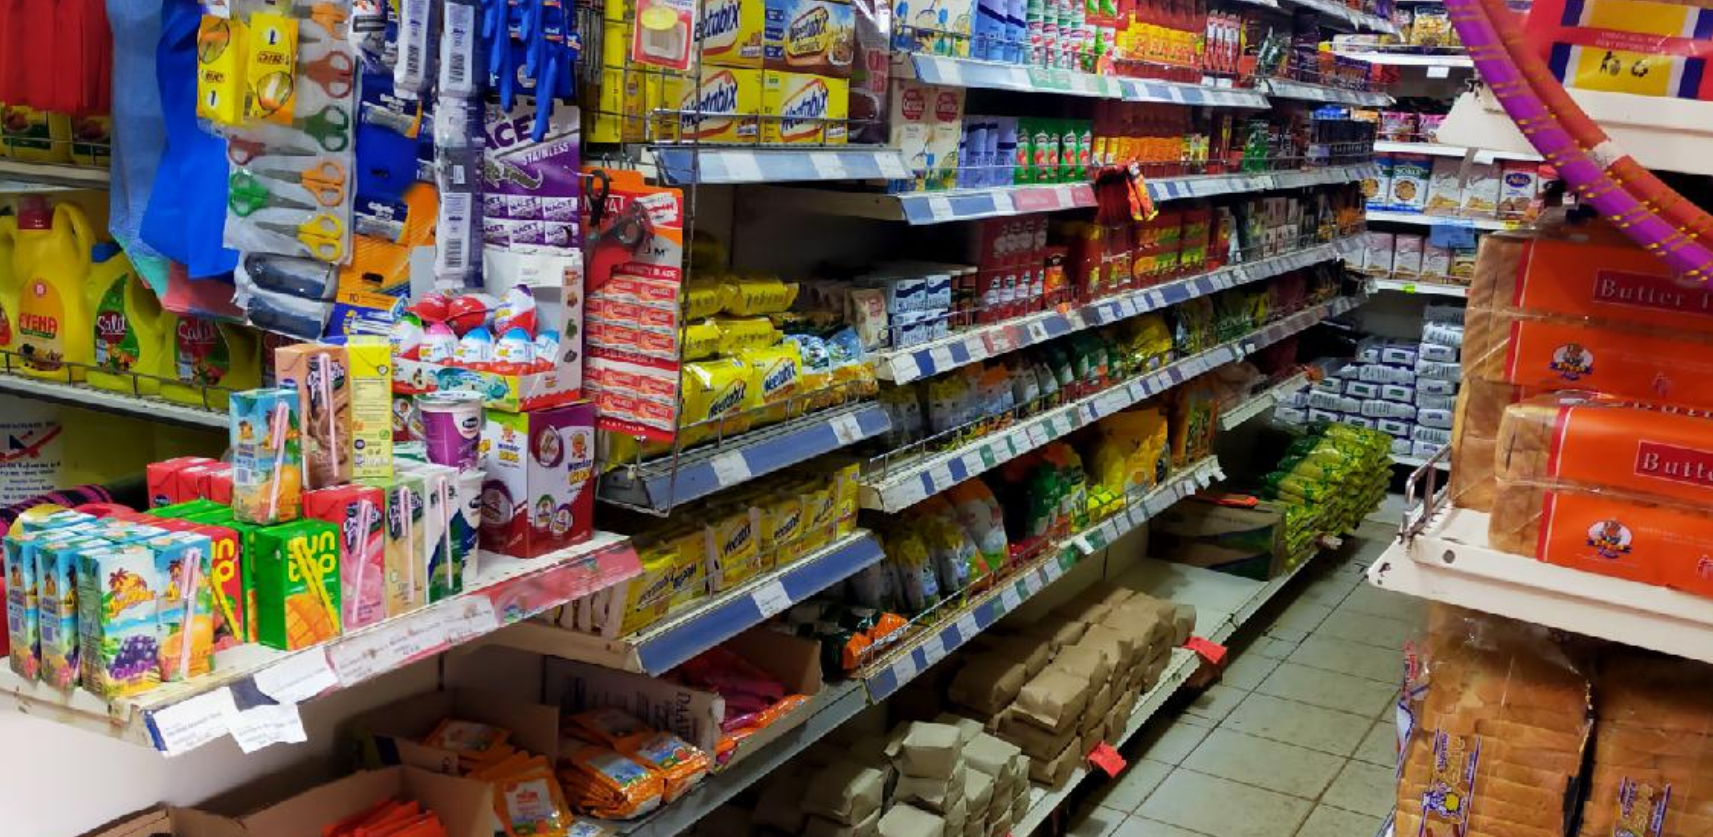 Brace for tougher times as Kenya’s Inflation hit 7 month high in April – Treasury CS Yatani